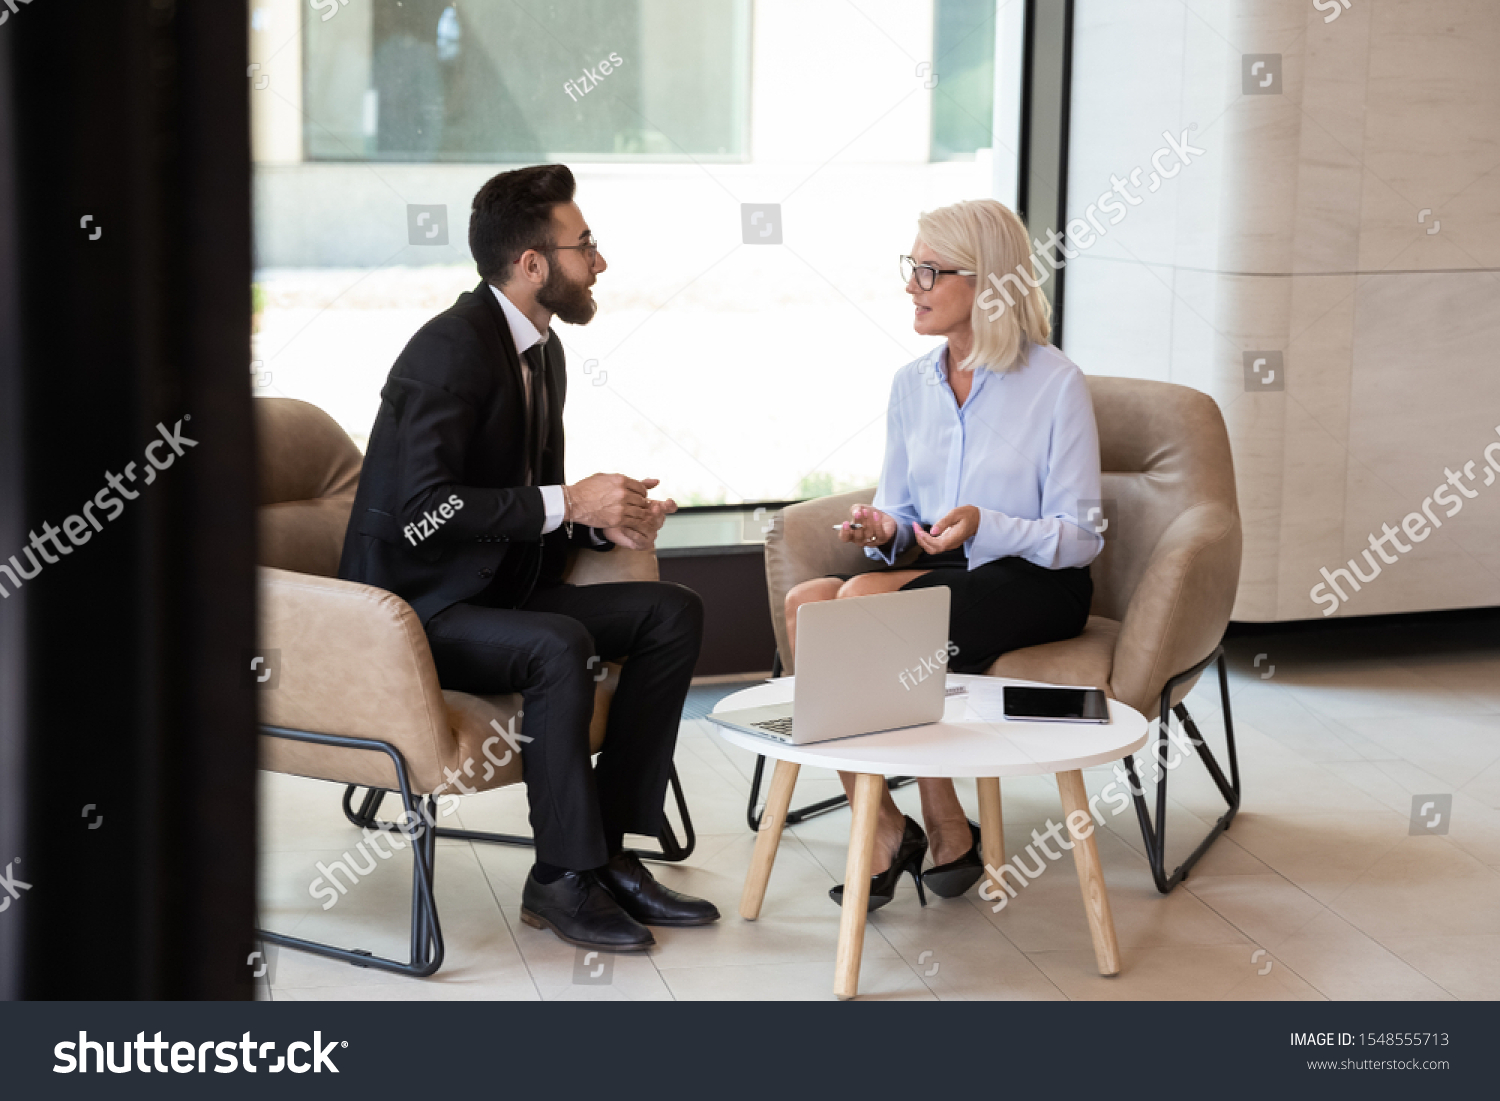 Diverse international man and woman business partners talk discussing potential cooperation, multiracial colleagues businesspeople speak consider project or idea at office meeting, partnership concept #1548555713